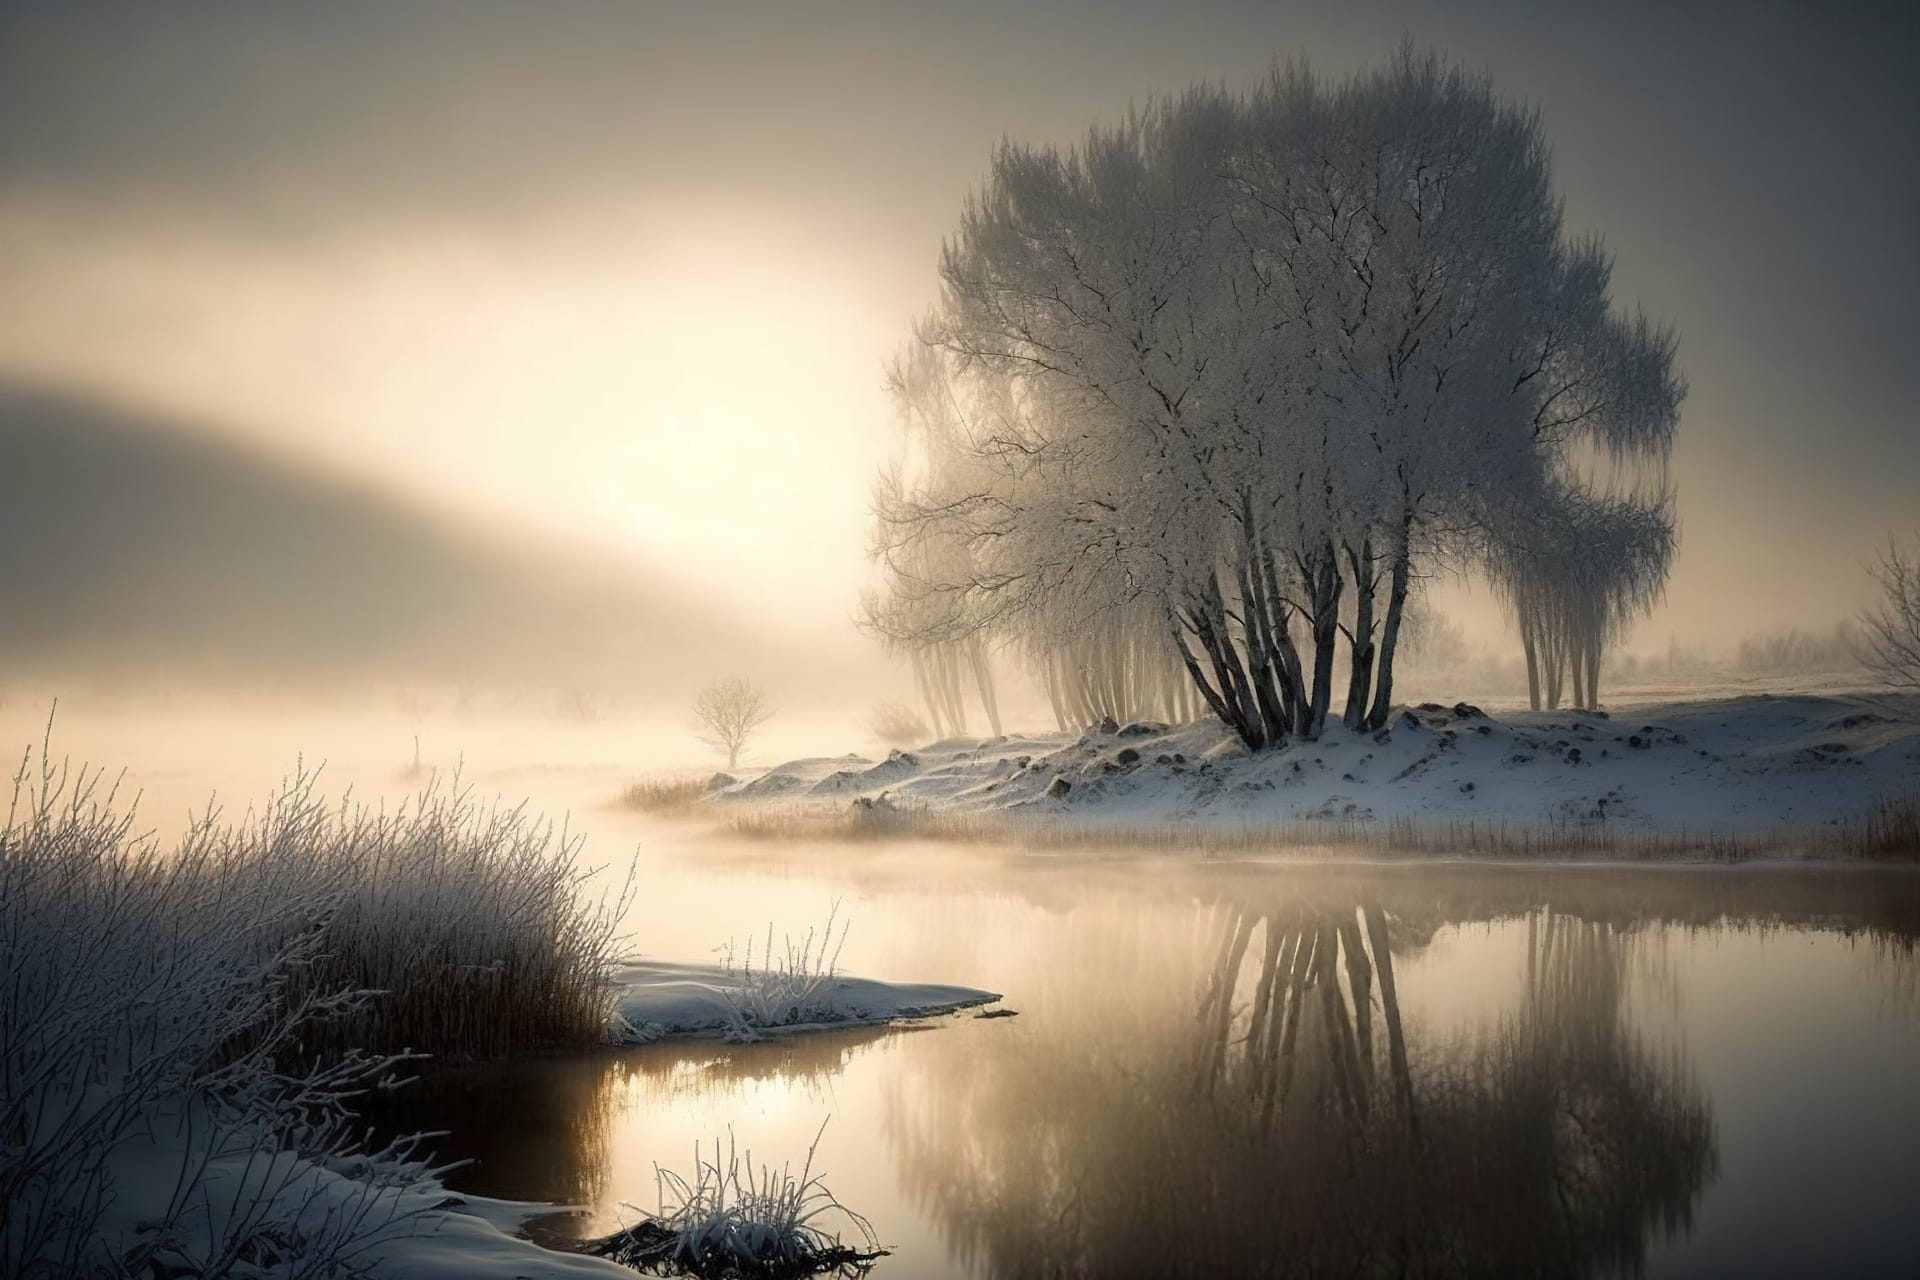 Winter foggy landscape with lonely tree river moody atmospheric image